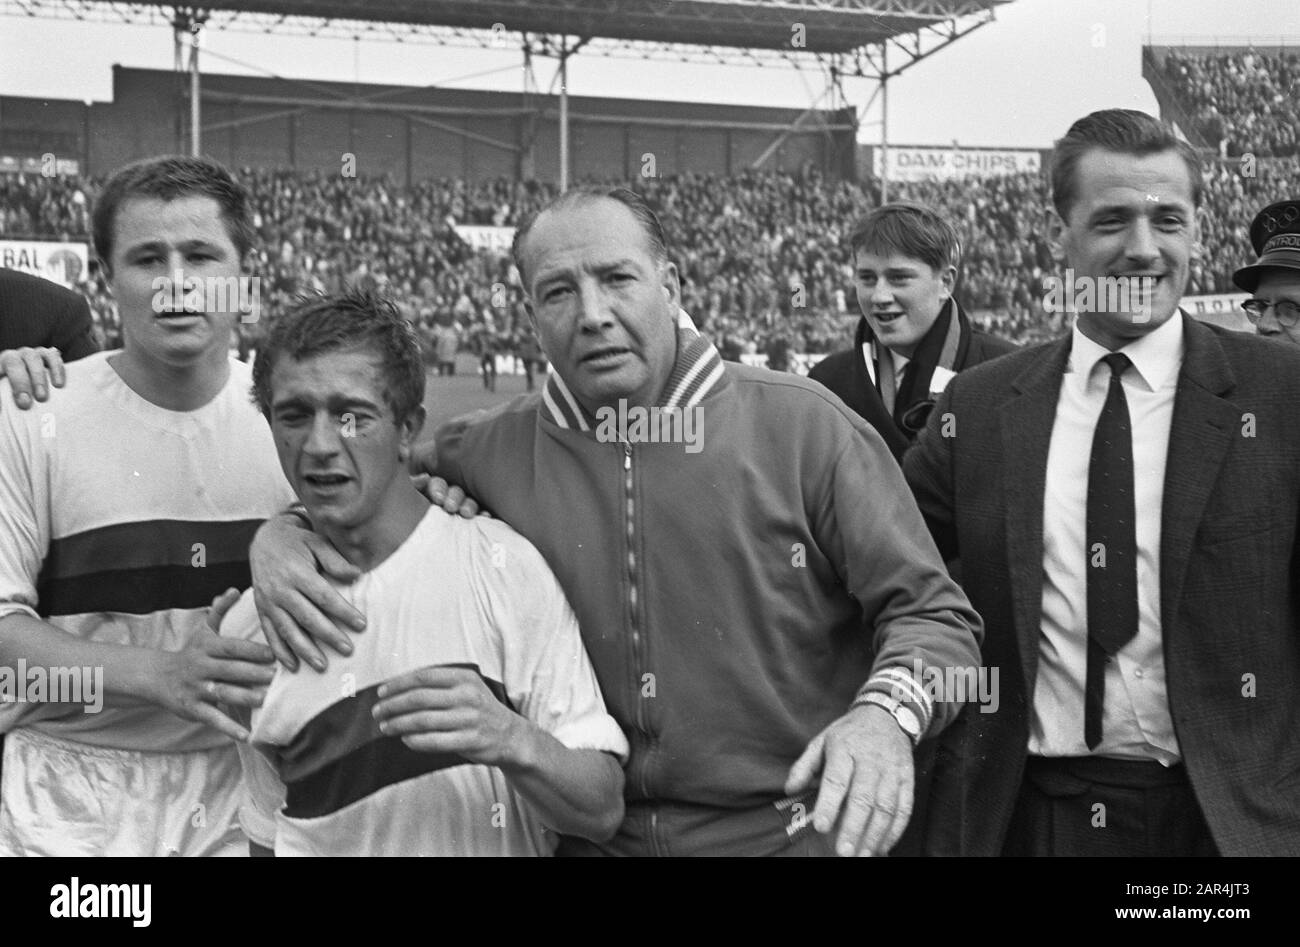 DWS against Feyenoord 2-0, players and trainer Talbot at Frits Flinkewing Date: October 3, 1965 Keywords: PLAYERS, sports, trainers, football Personal Name: Flashwing, Frits, Talbot, [...] Institution name: Feyenoord Stock Photo